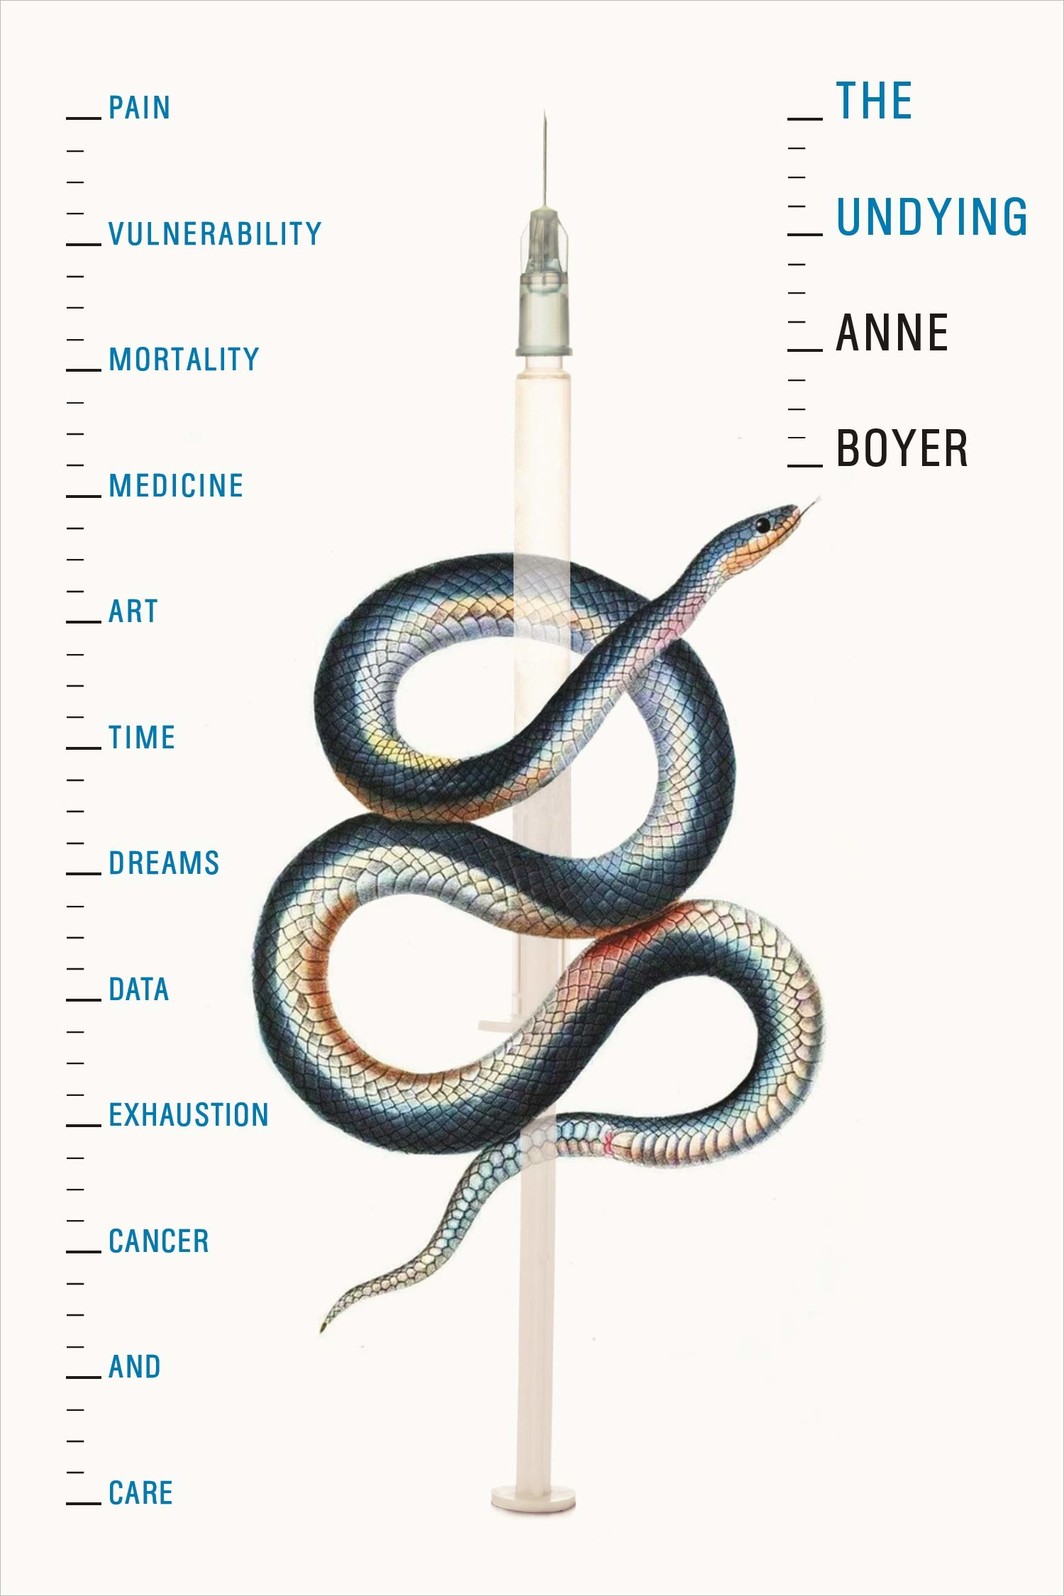 The cover of The Undying: Pain, Vulnerability, Mortality, Medicine, Art, Time, Dreams, Data, Exhaustion, Cancer, and Care